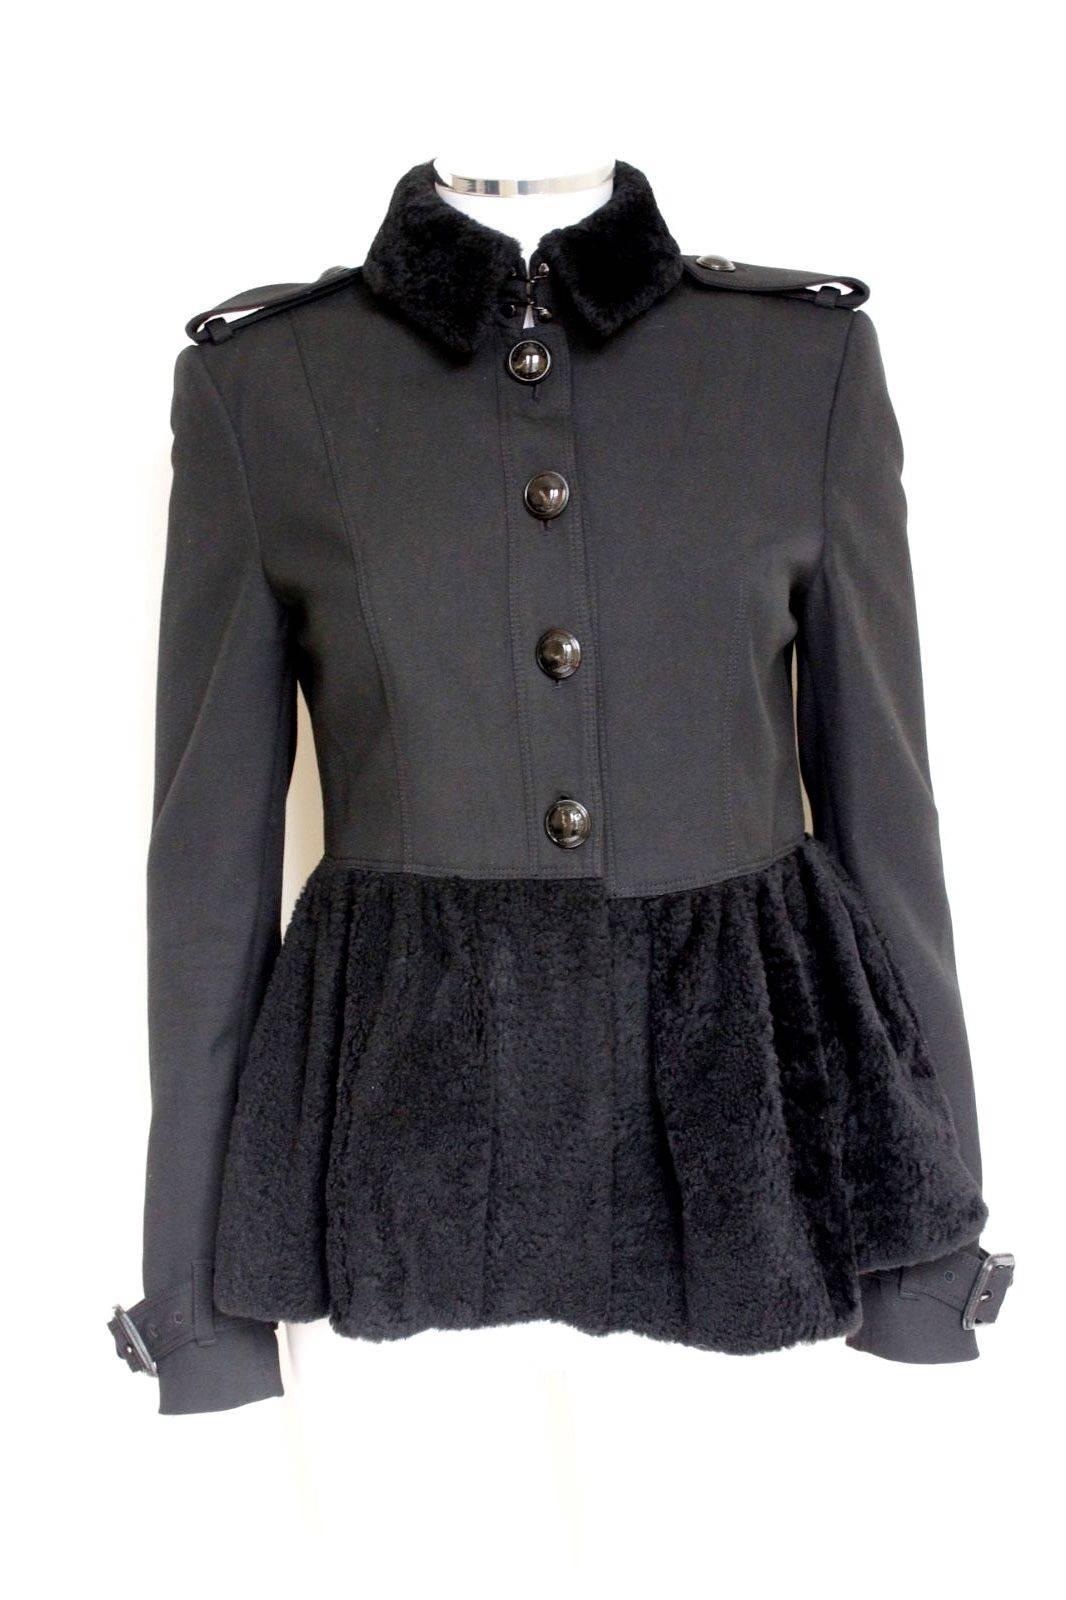 Burberry London Black Shearling fur Military Jacket UK 10-8 

100% shearling peplum panel and collar. Military epaulettes to the shoulder 

Length 24 inches, sleeve 25 inches, chest 18.5 inches, waist 16.5 inches across laid flat

Size uk 10, comes